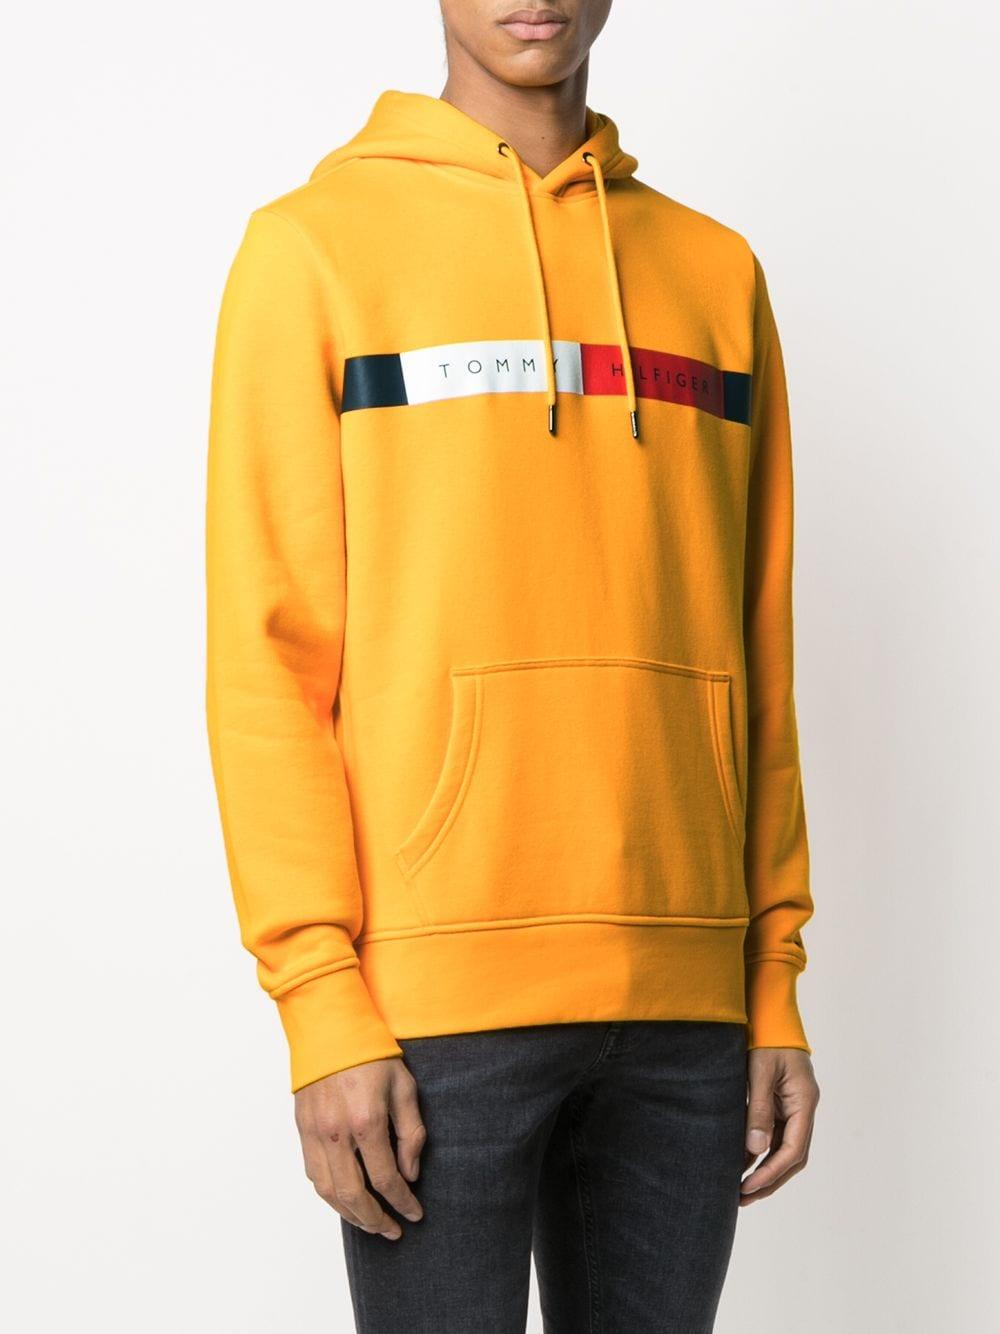 Tommy Hilfiger Cotton Logo-print Hoodie in Yellow for Men - Lyst